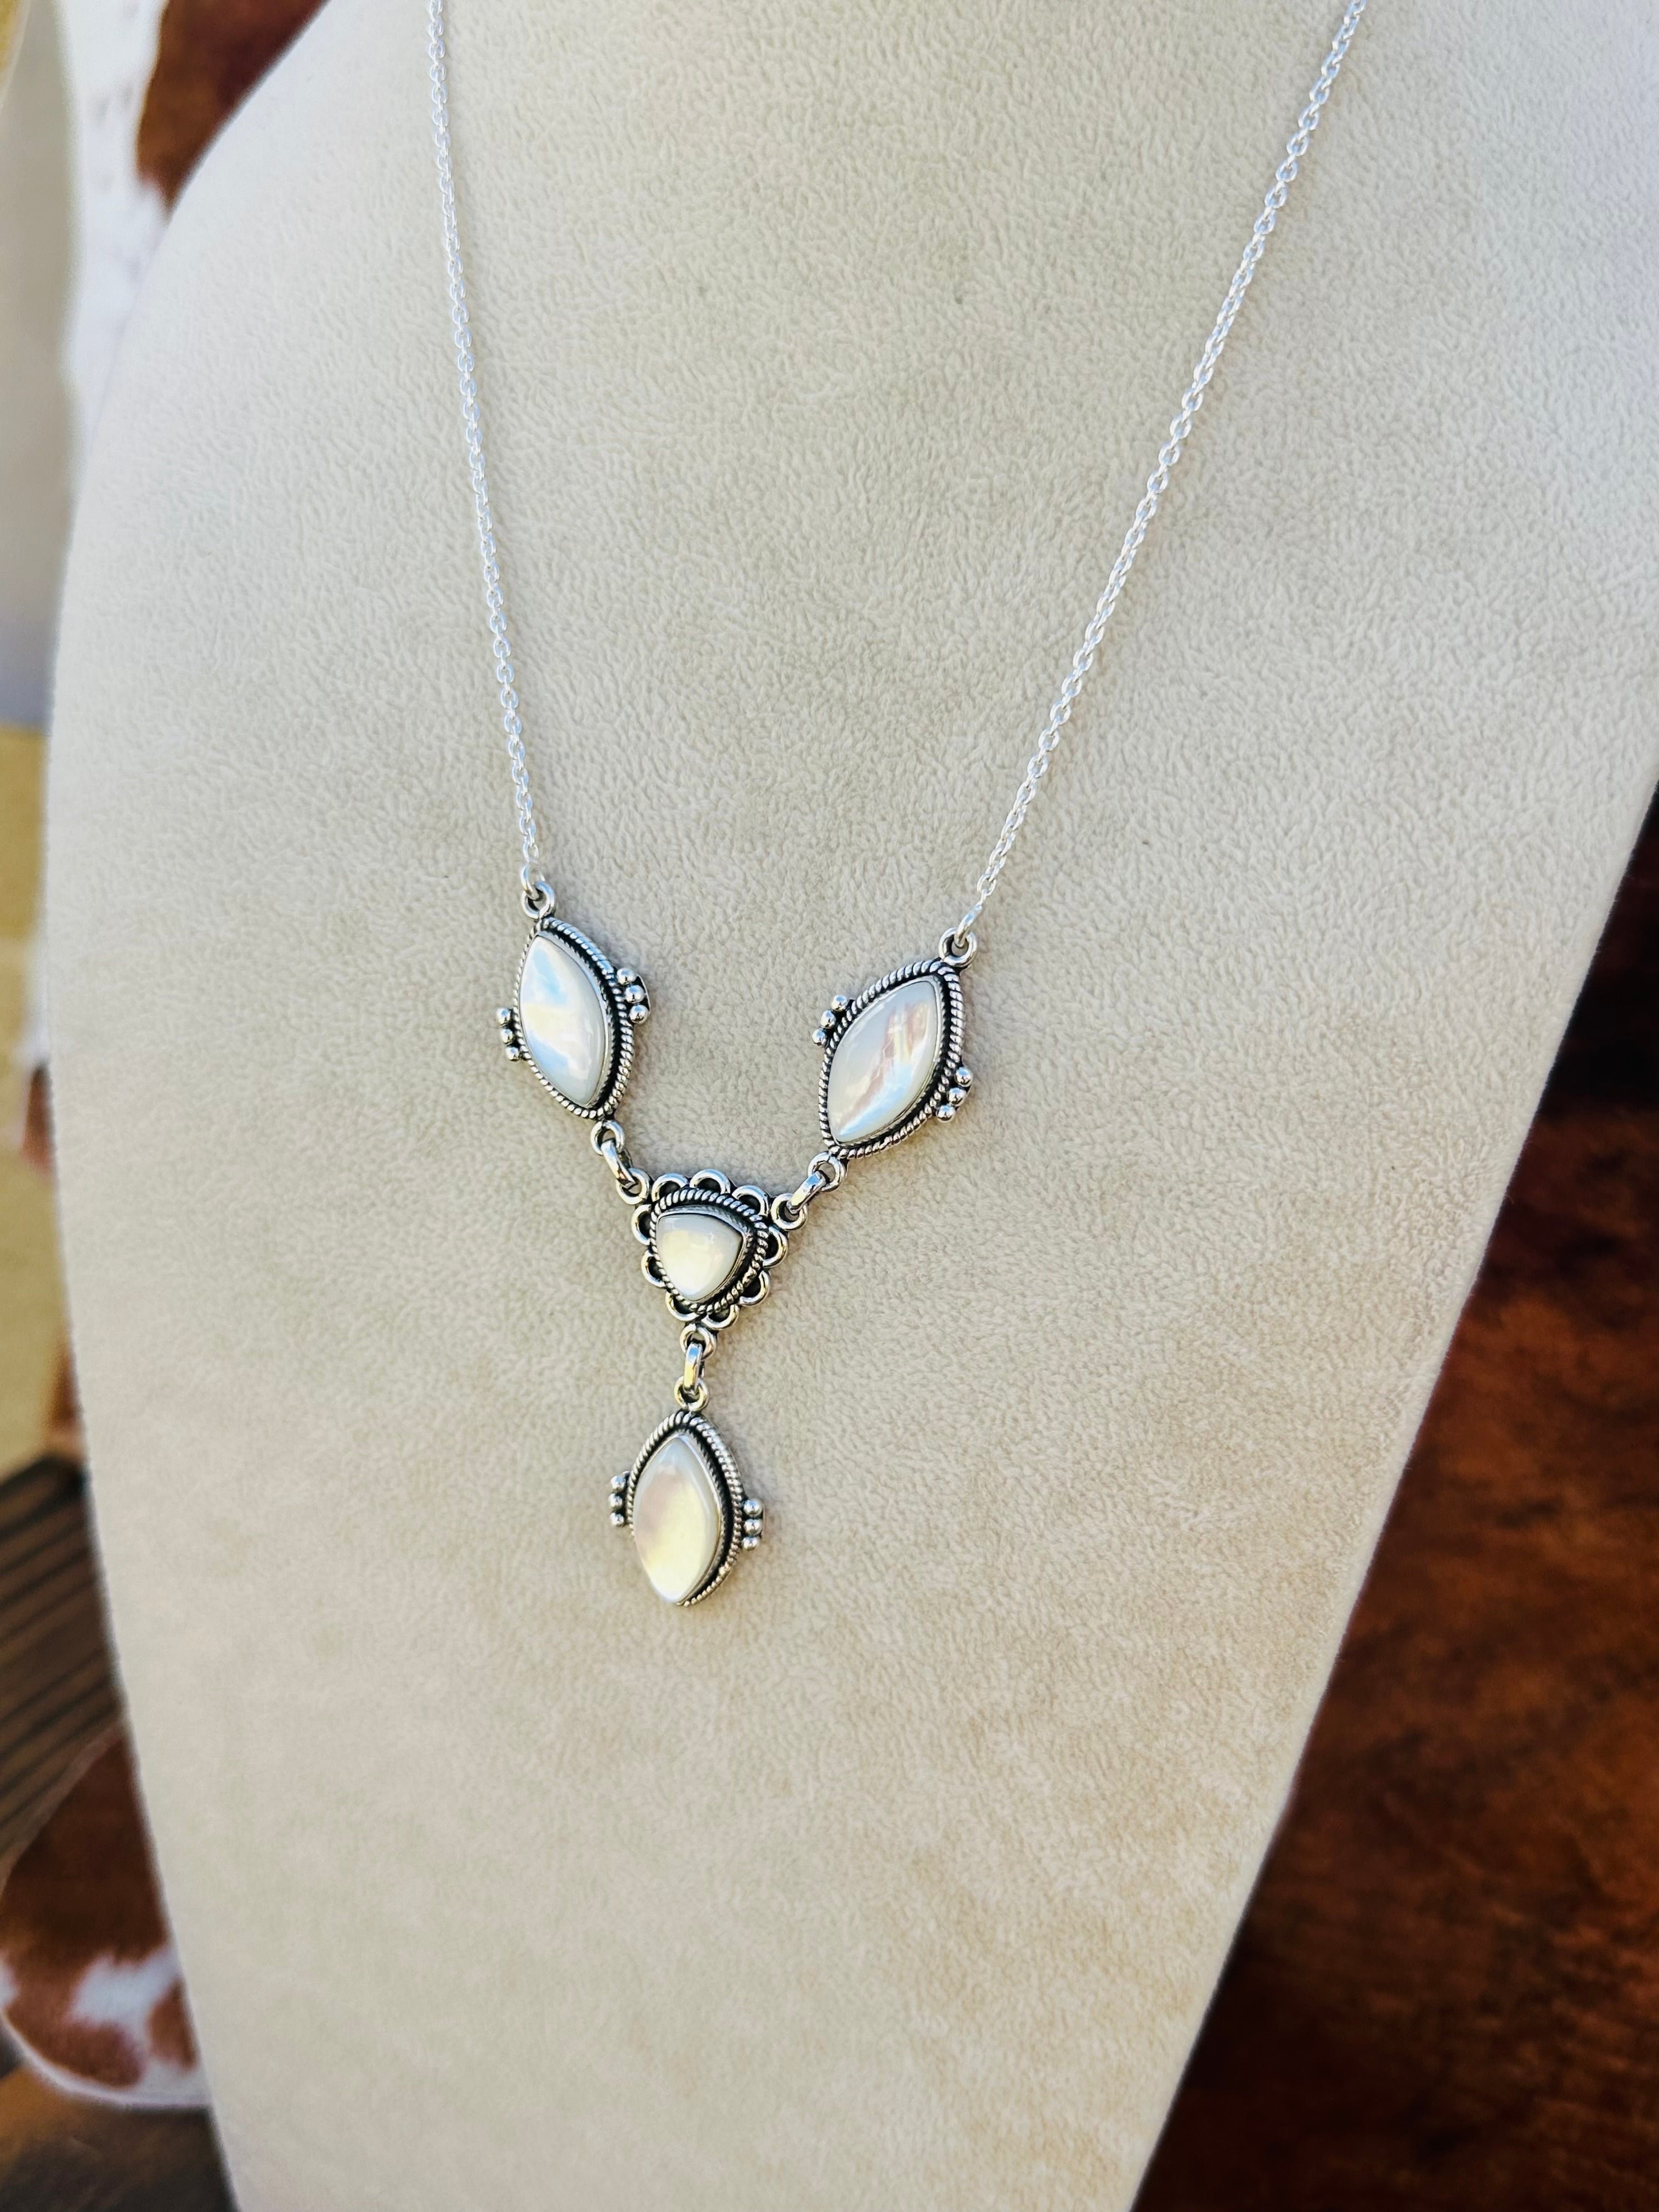 Southwest Handmade Mother of Pearl & Sterling Silver Lariat Necklace